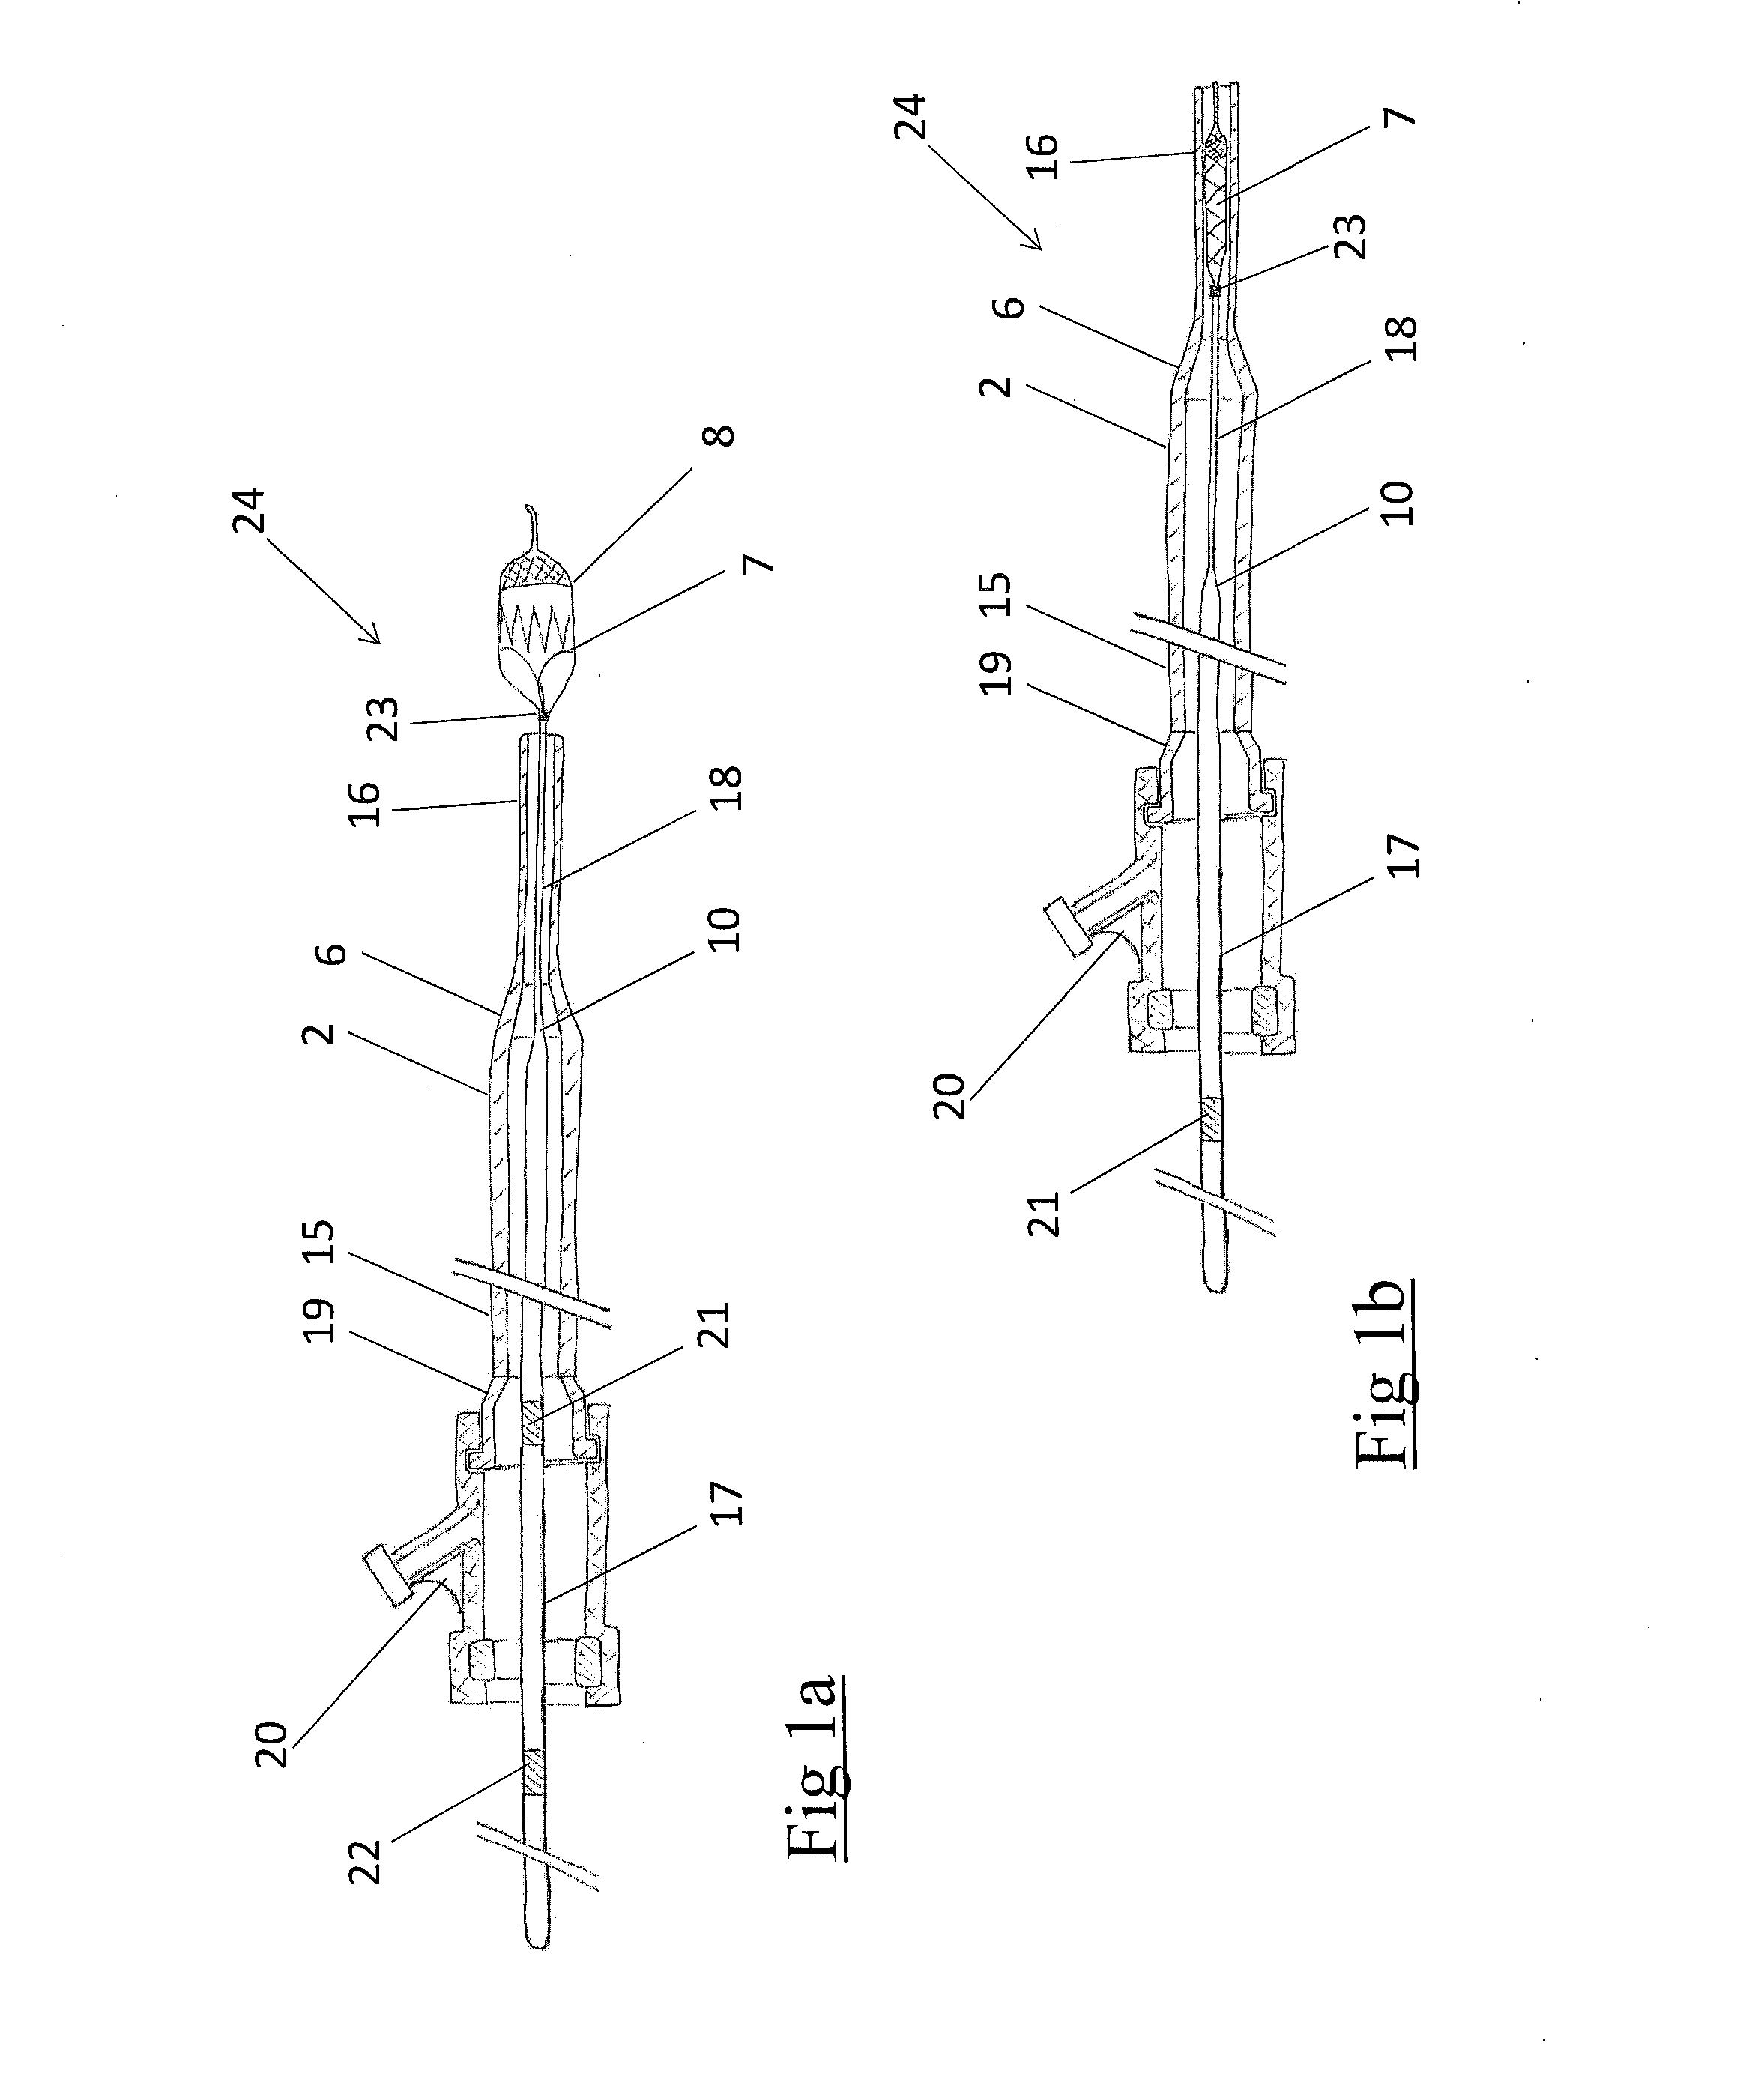 System for removing a clot from a blood vessel